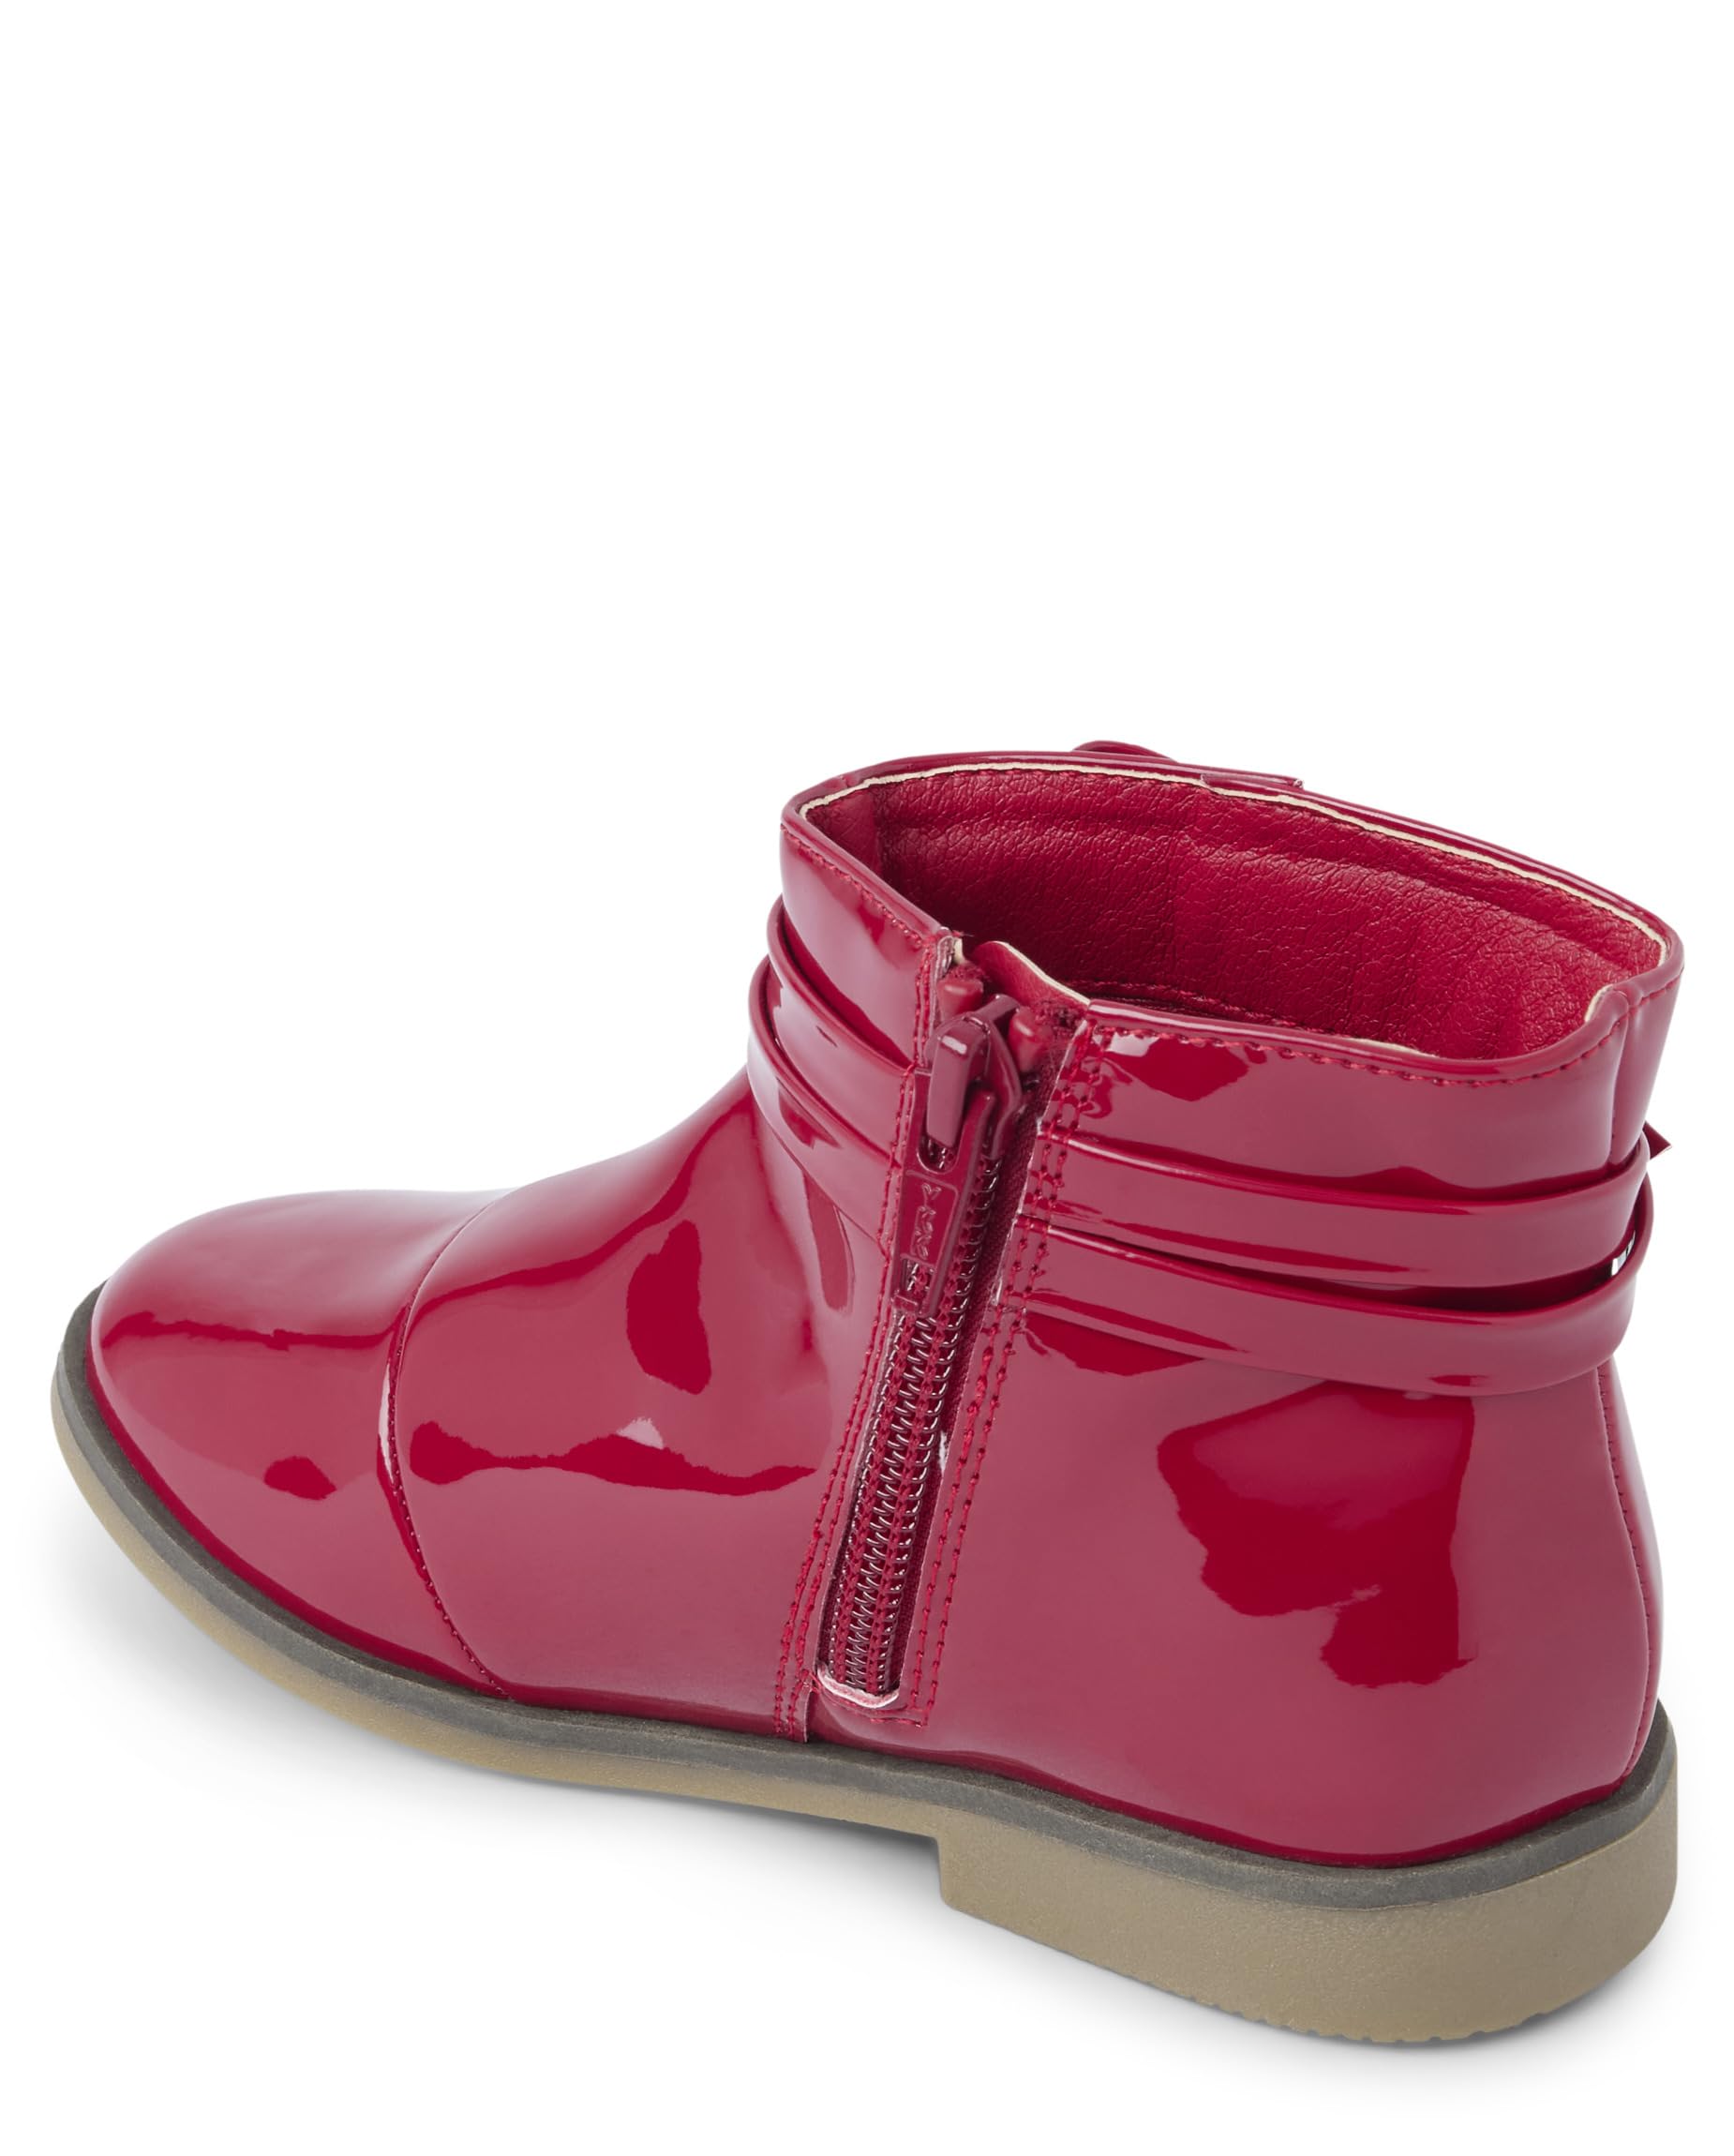 Gymboree Unisex-Child and Toddler Faux Leather Booties Ankle Boot